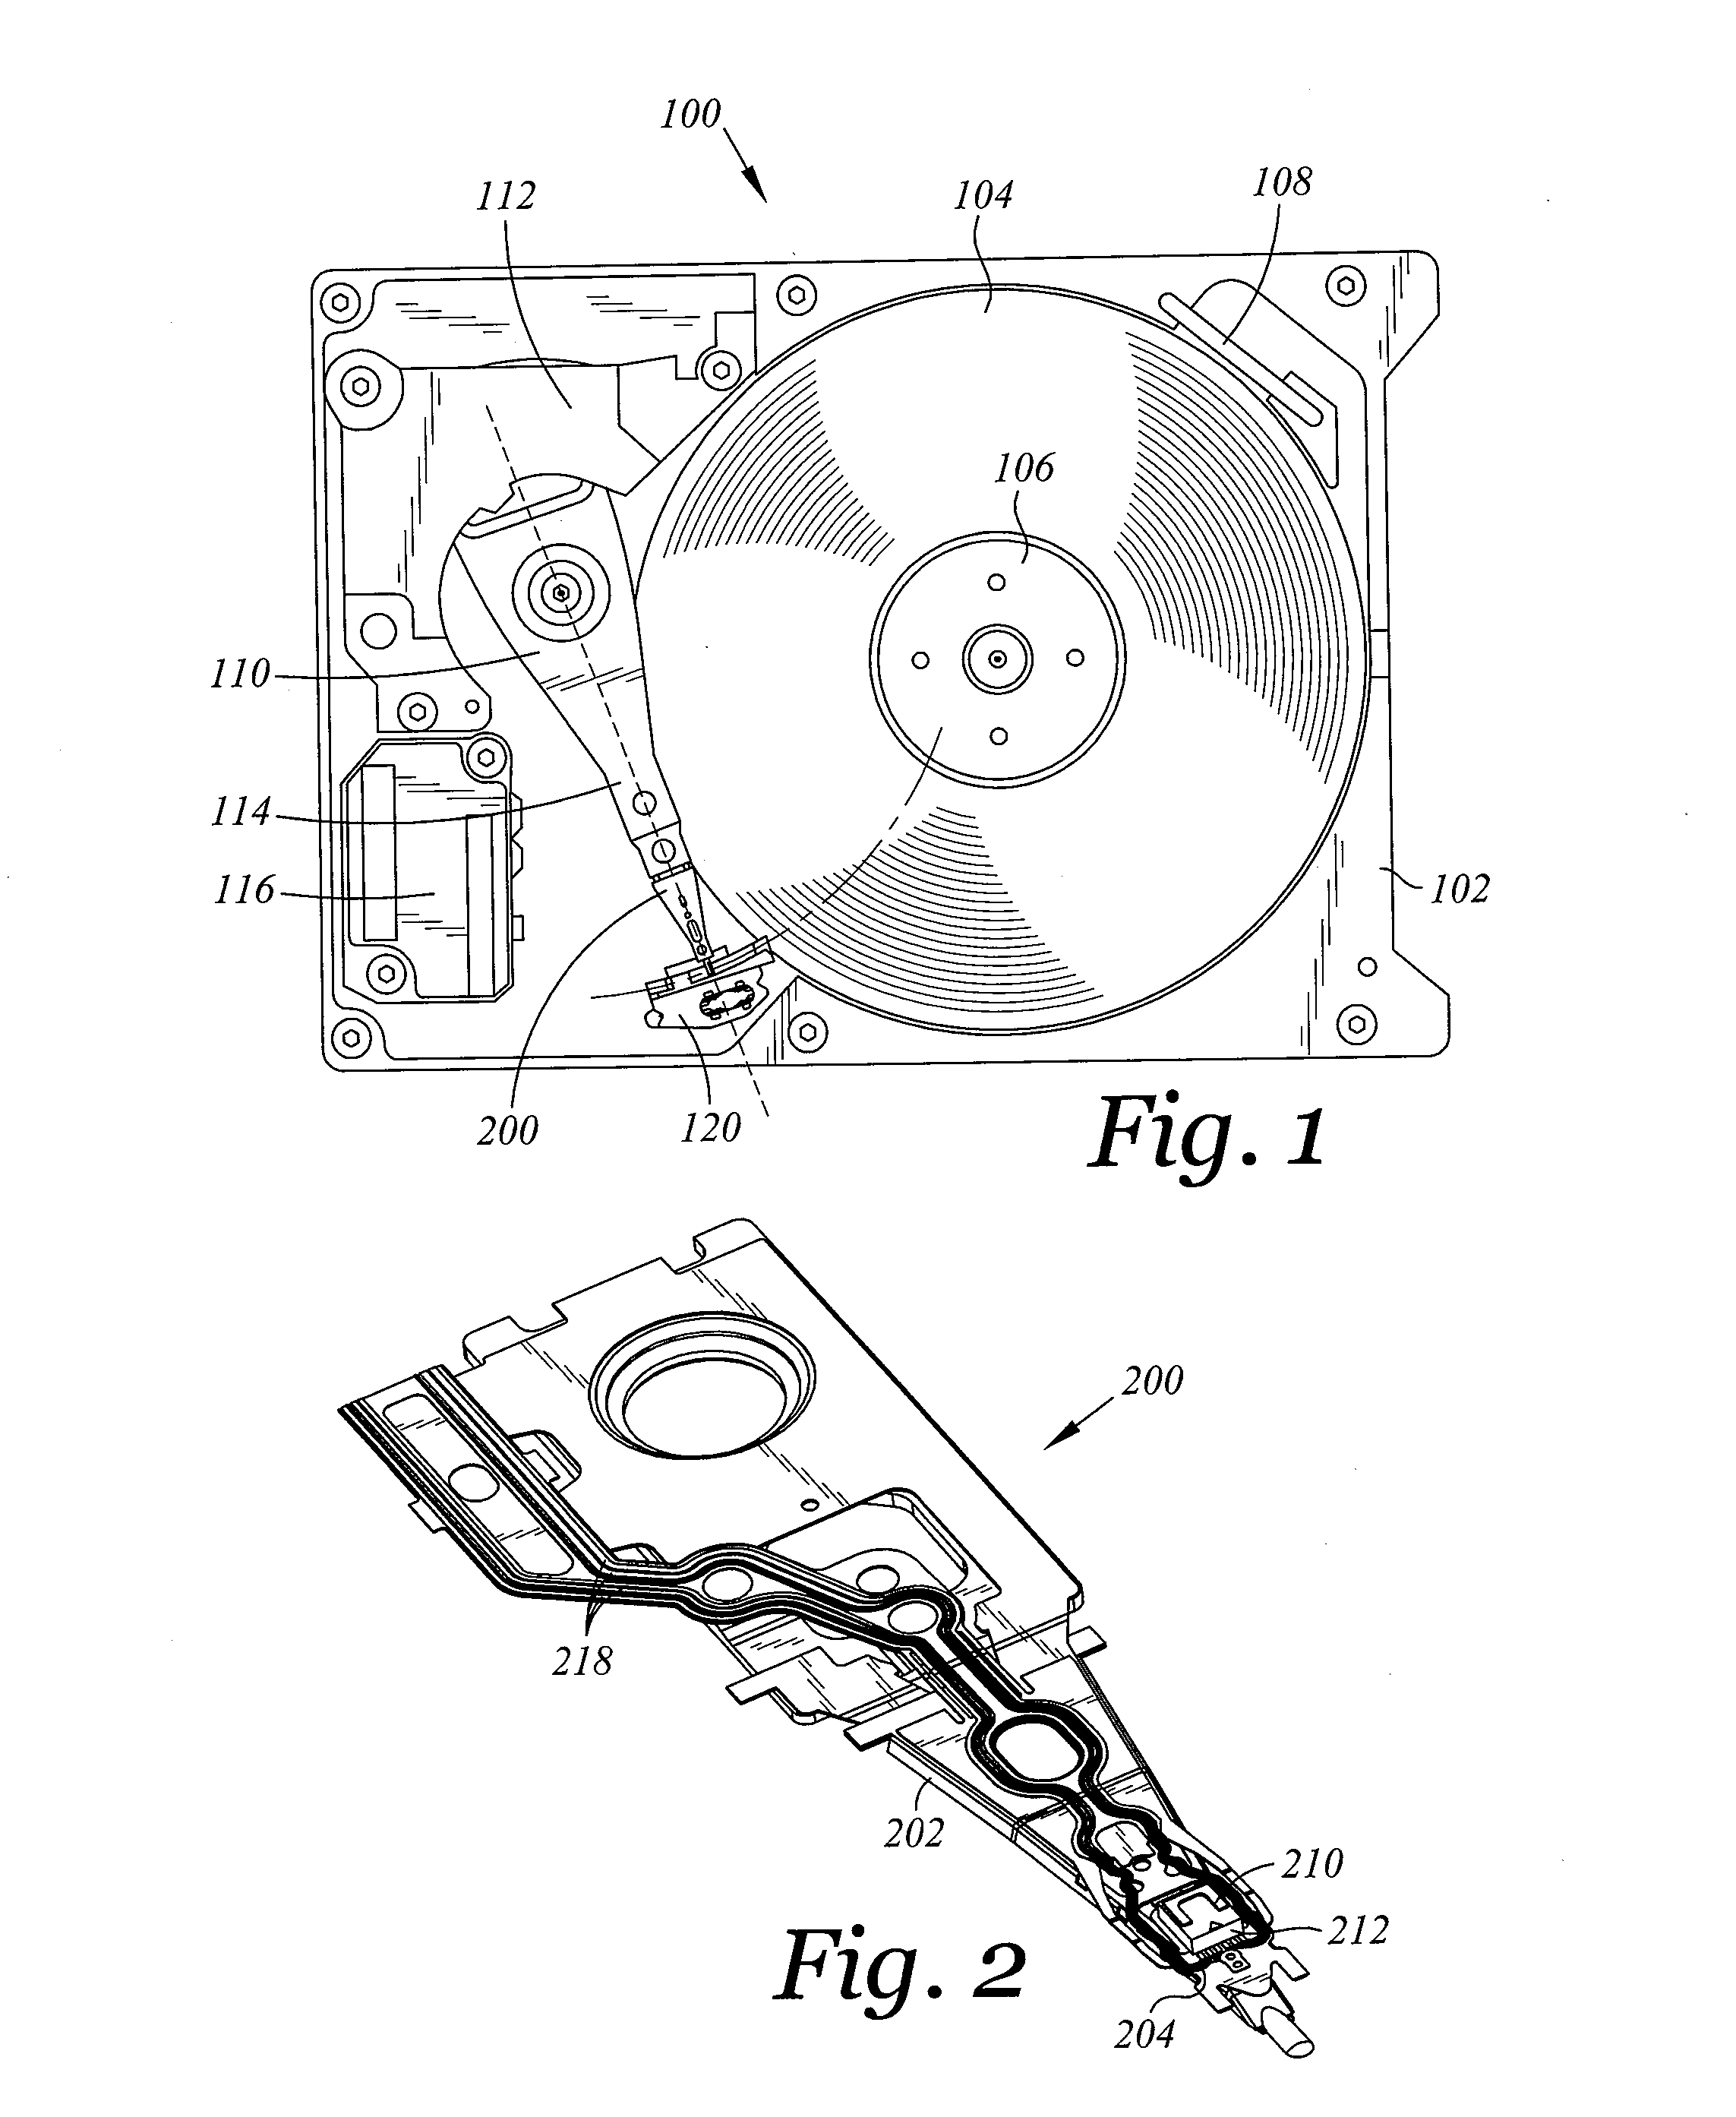 Head gimbal assembly having a radial rotary piezoelectric microactuator between a read head and a flexure tongue